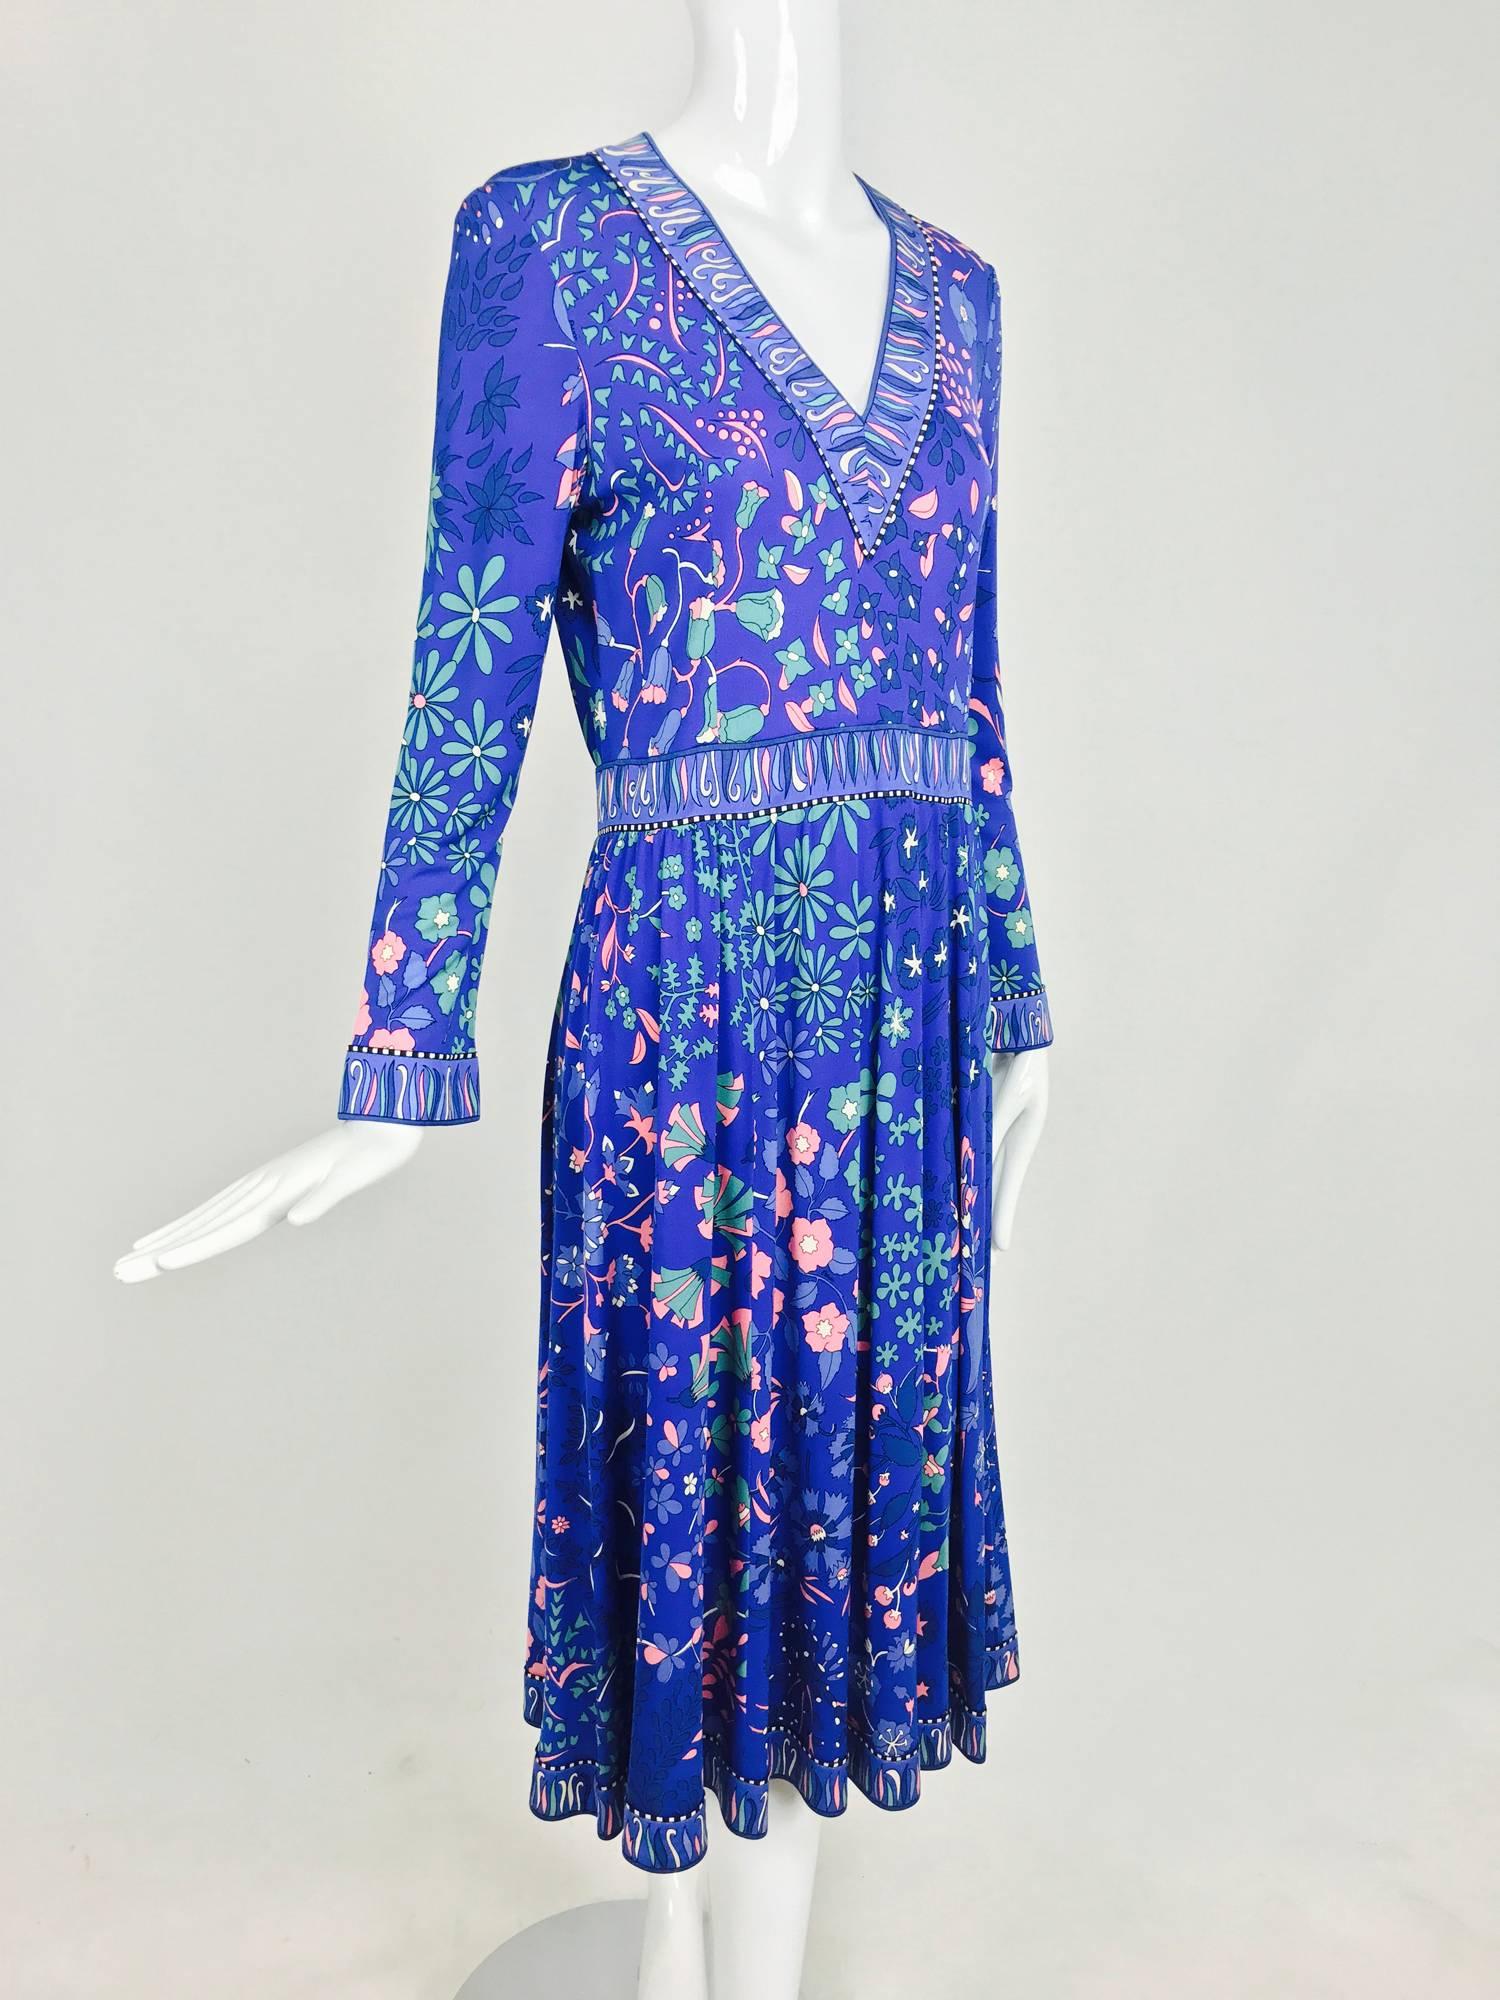 Bessi silk jersey dress from the 1970s...Banded blue V neckline, long sleeves with banded cuffs...Banded waist and lightly gathered skirt that flares at the hem...Unlined...Closes at the back with a zipper and hook and eye...The print is beautiful